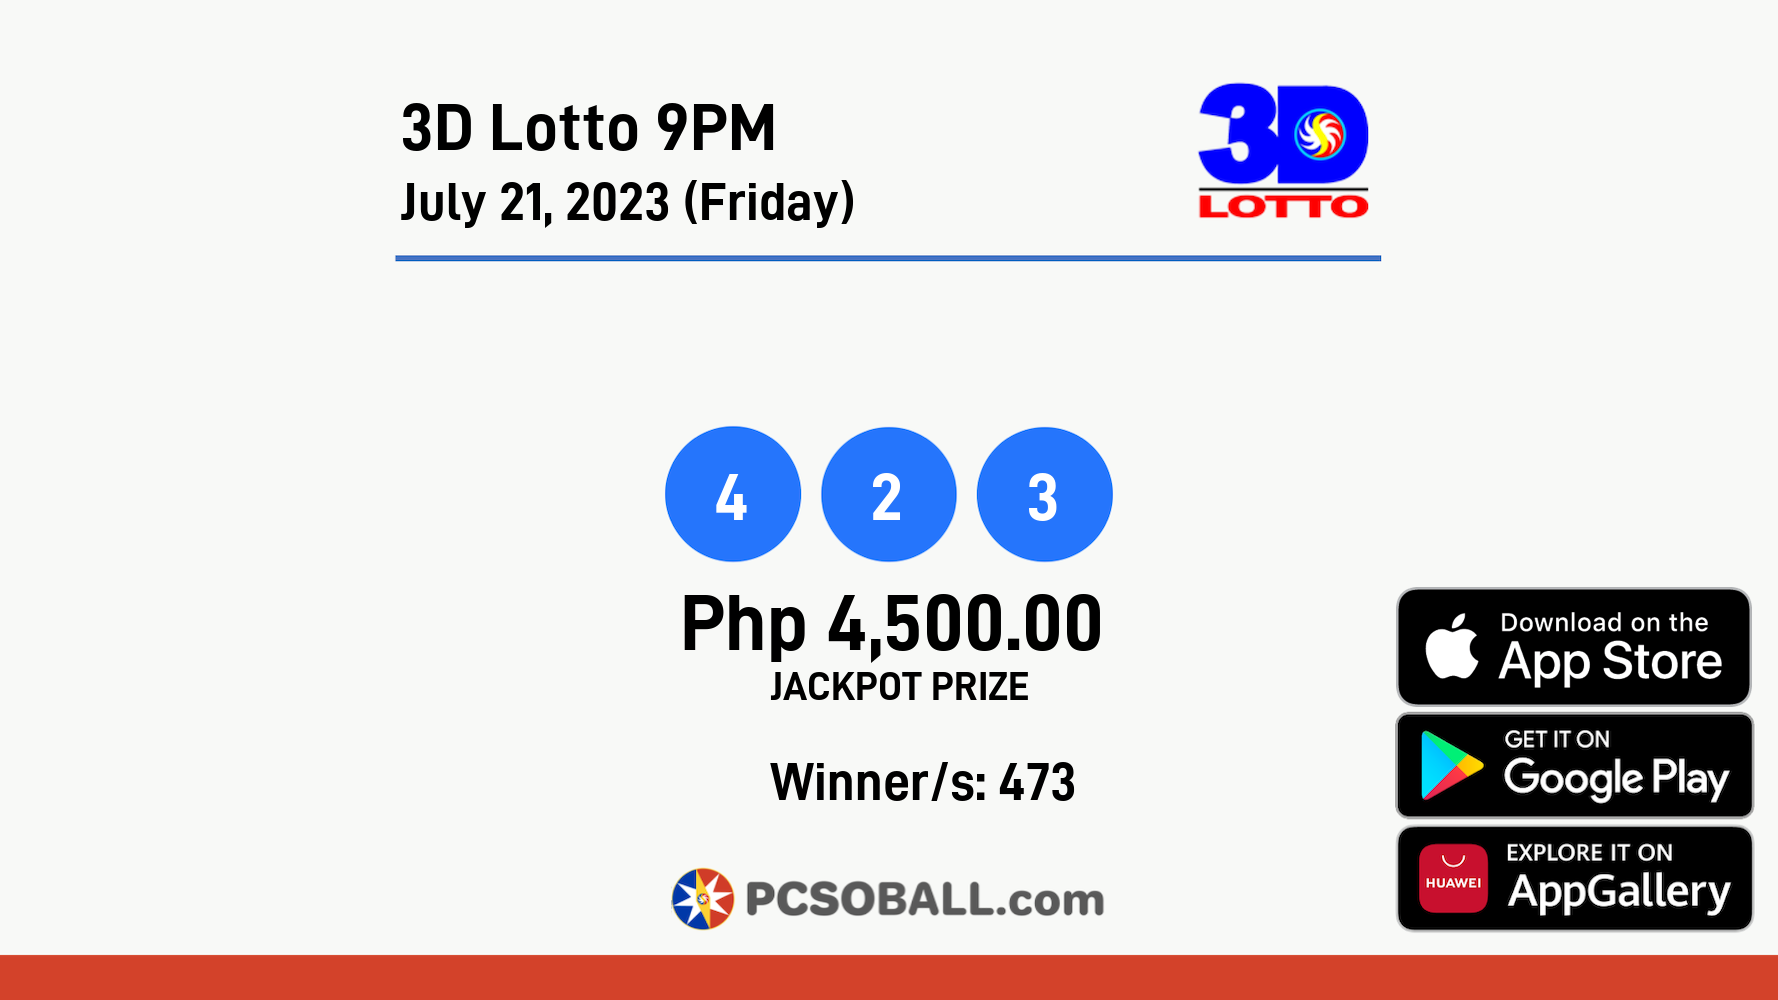 3D Lotto 9PM July 21, 2023 (Friday) Result